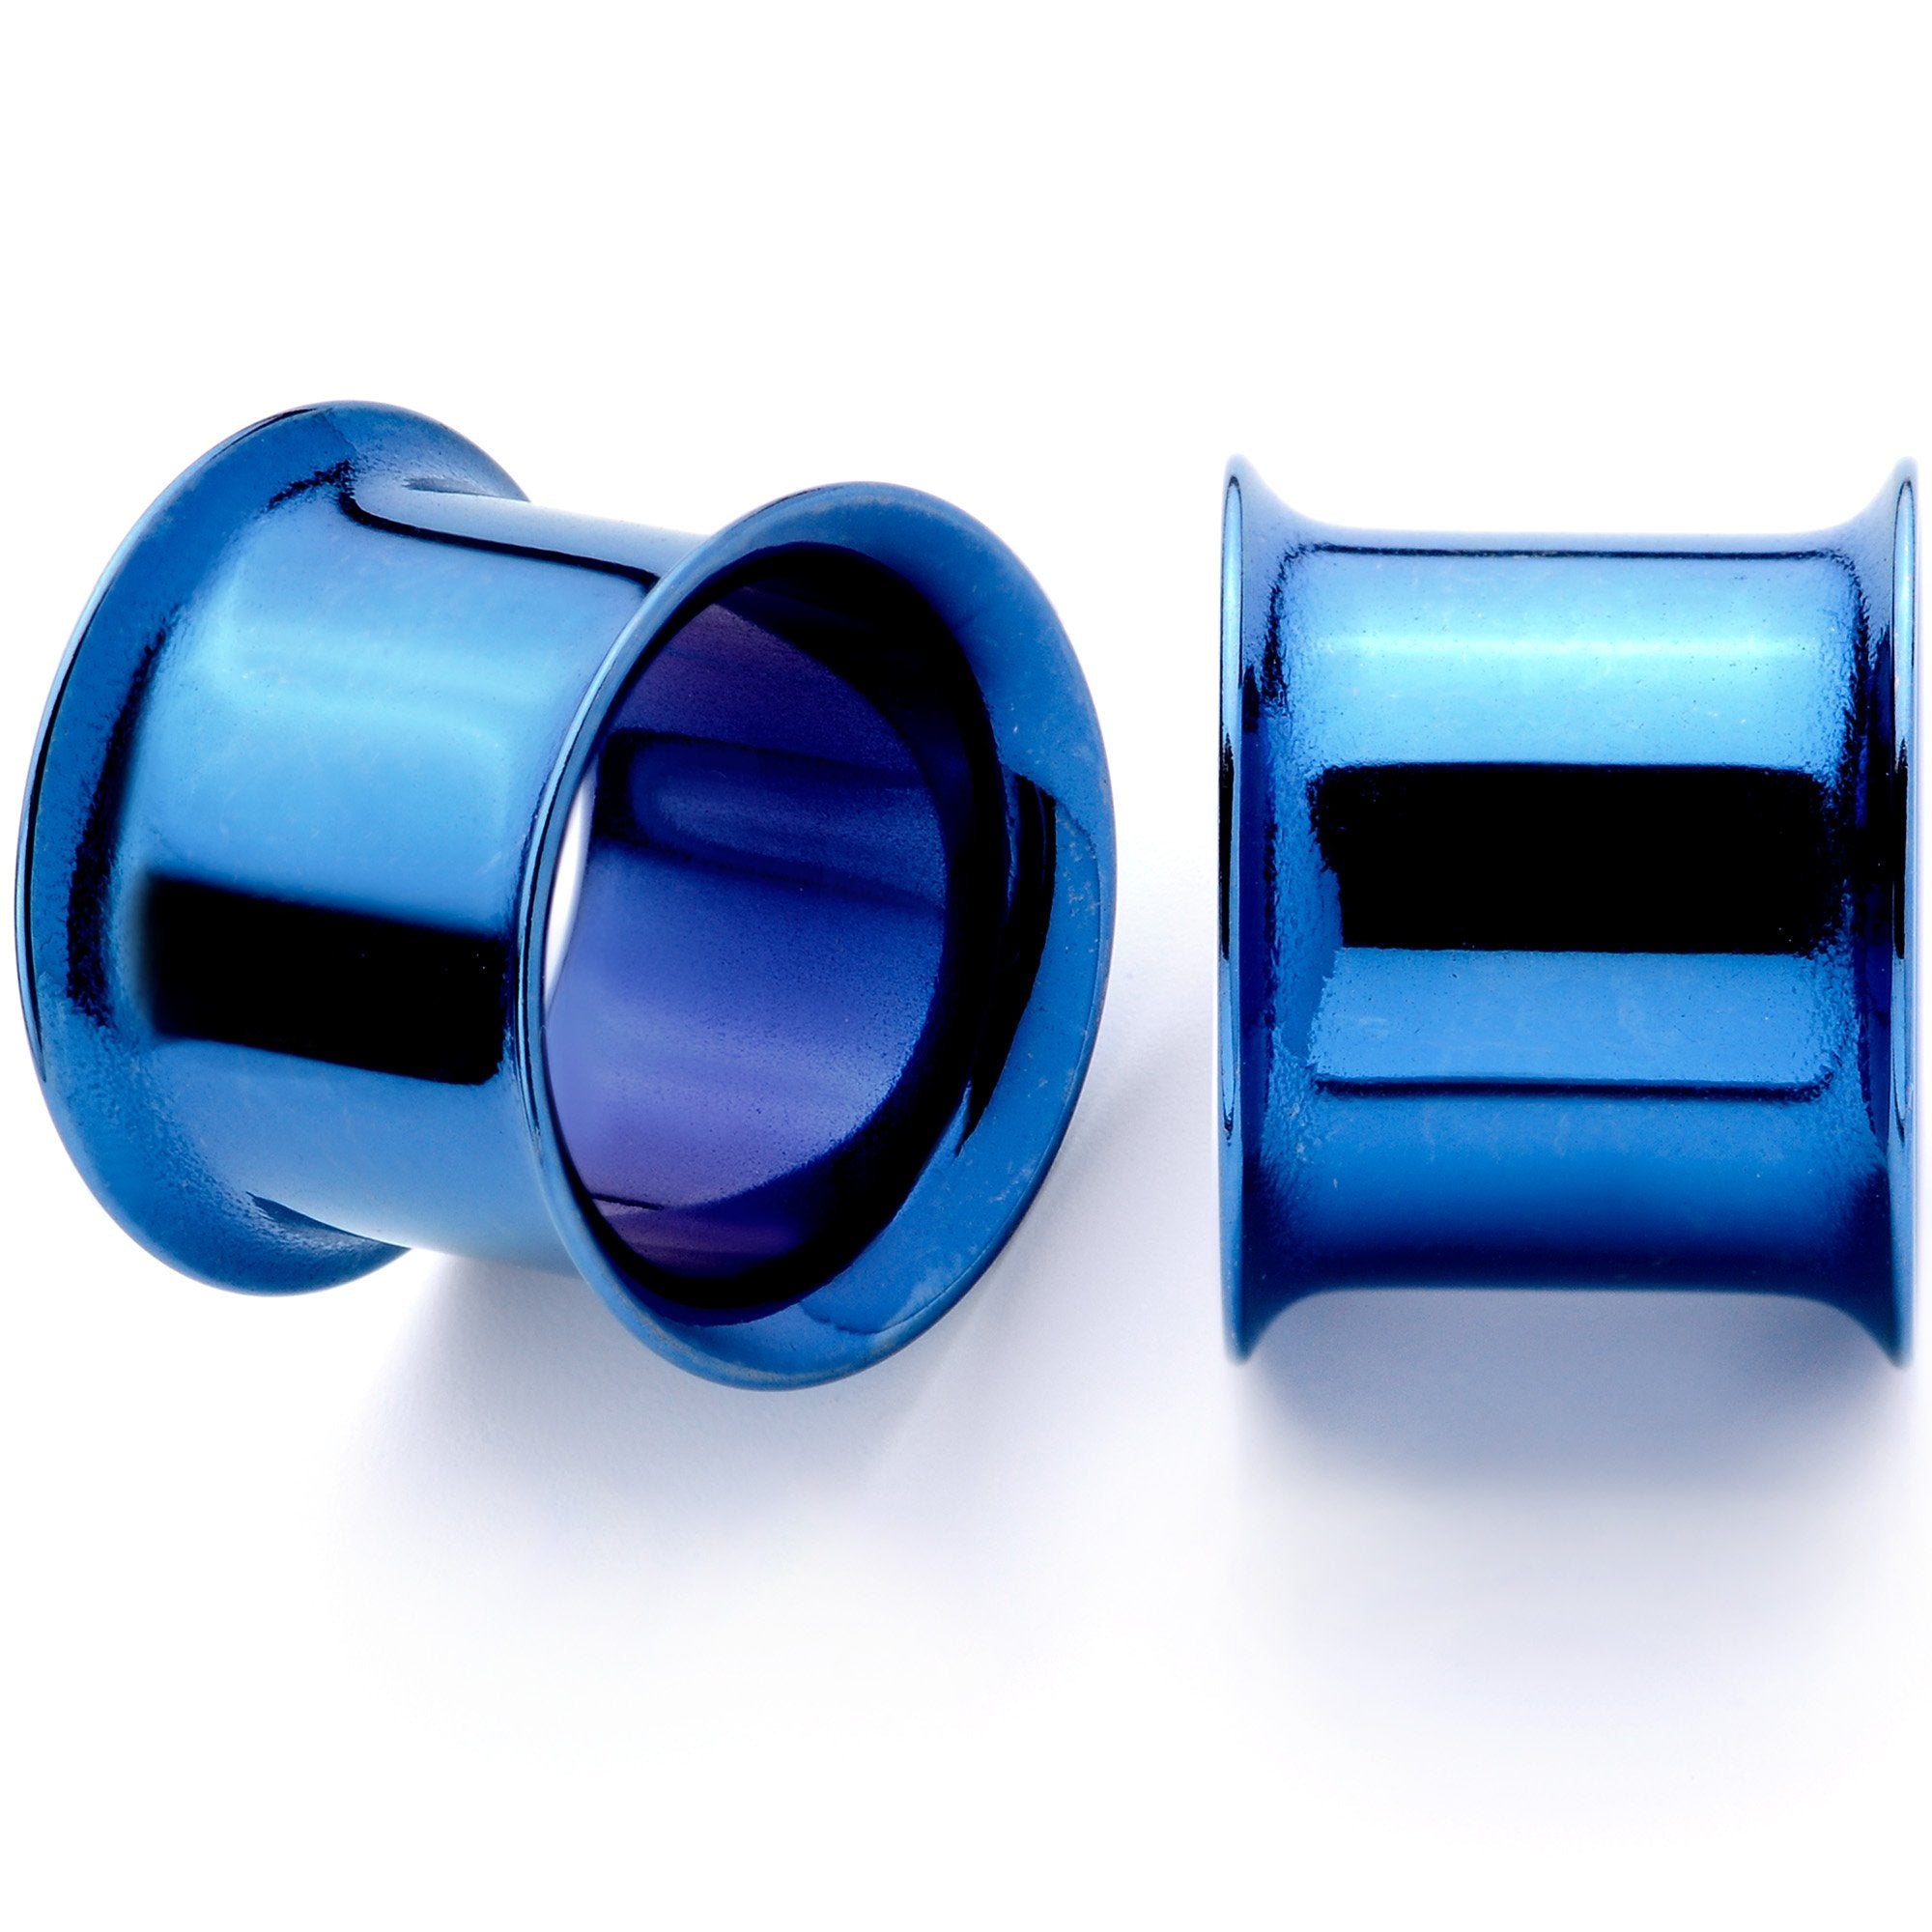 Blue Anodized Steel Double Flare Tunnel Plug Set 4mm to 16mm